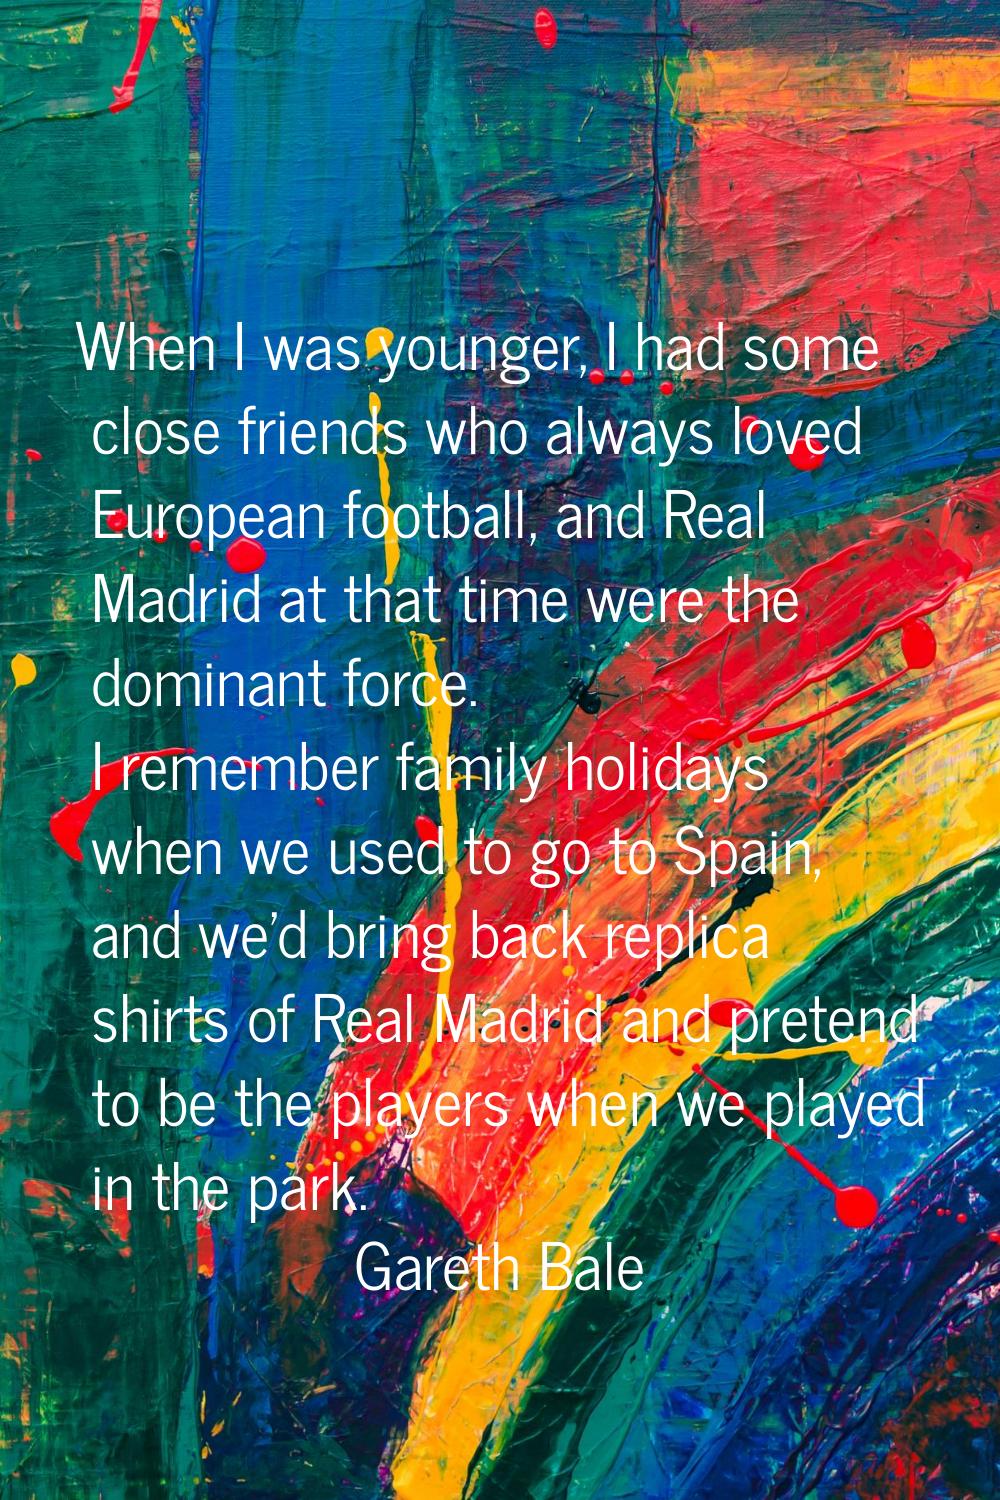 When I was younger, I had some close friends who always loved European football, and Real Madrid at